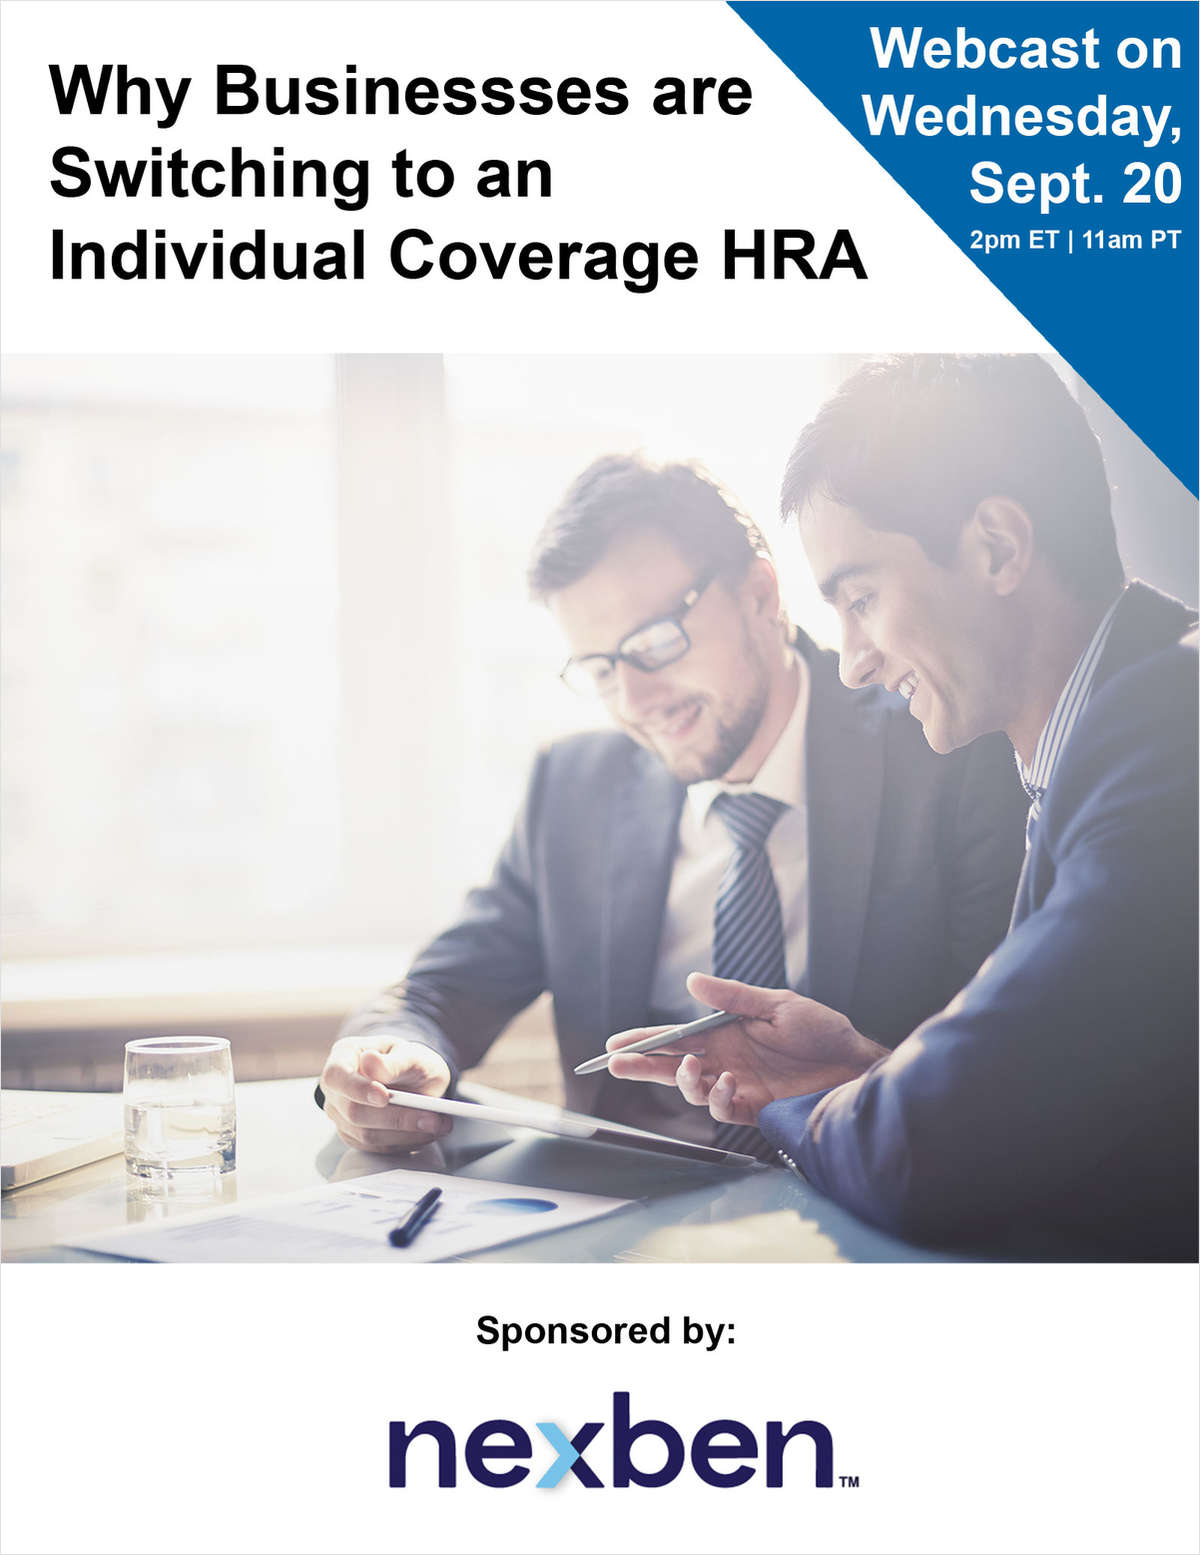 Why Businesses are Switching to an Individual Coverage HRA